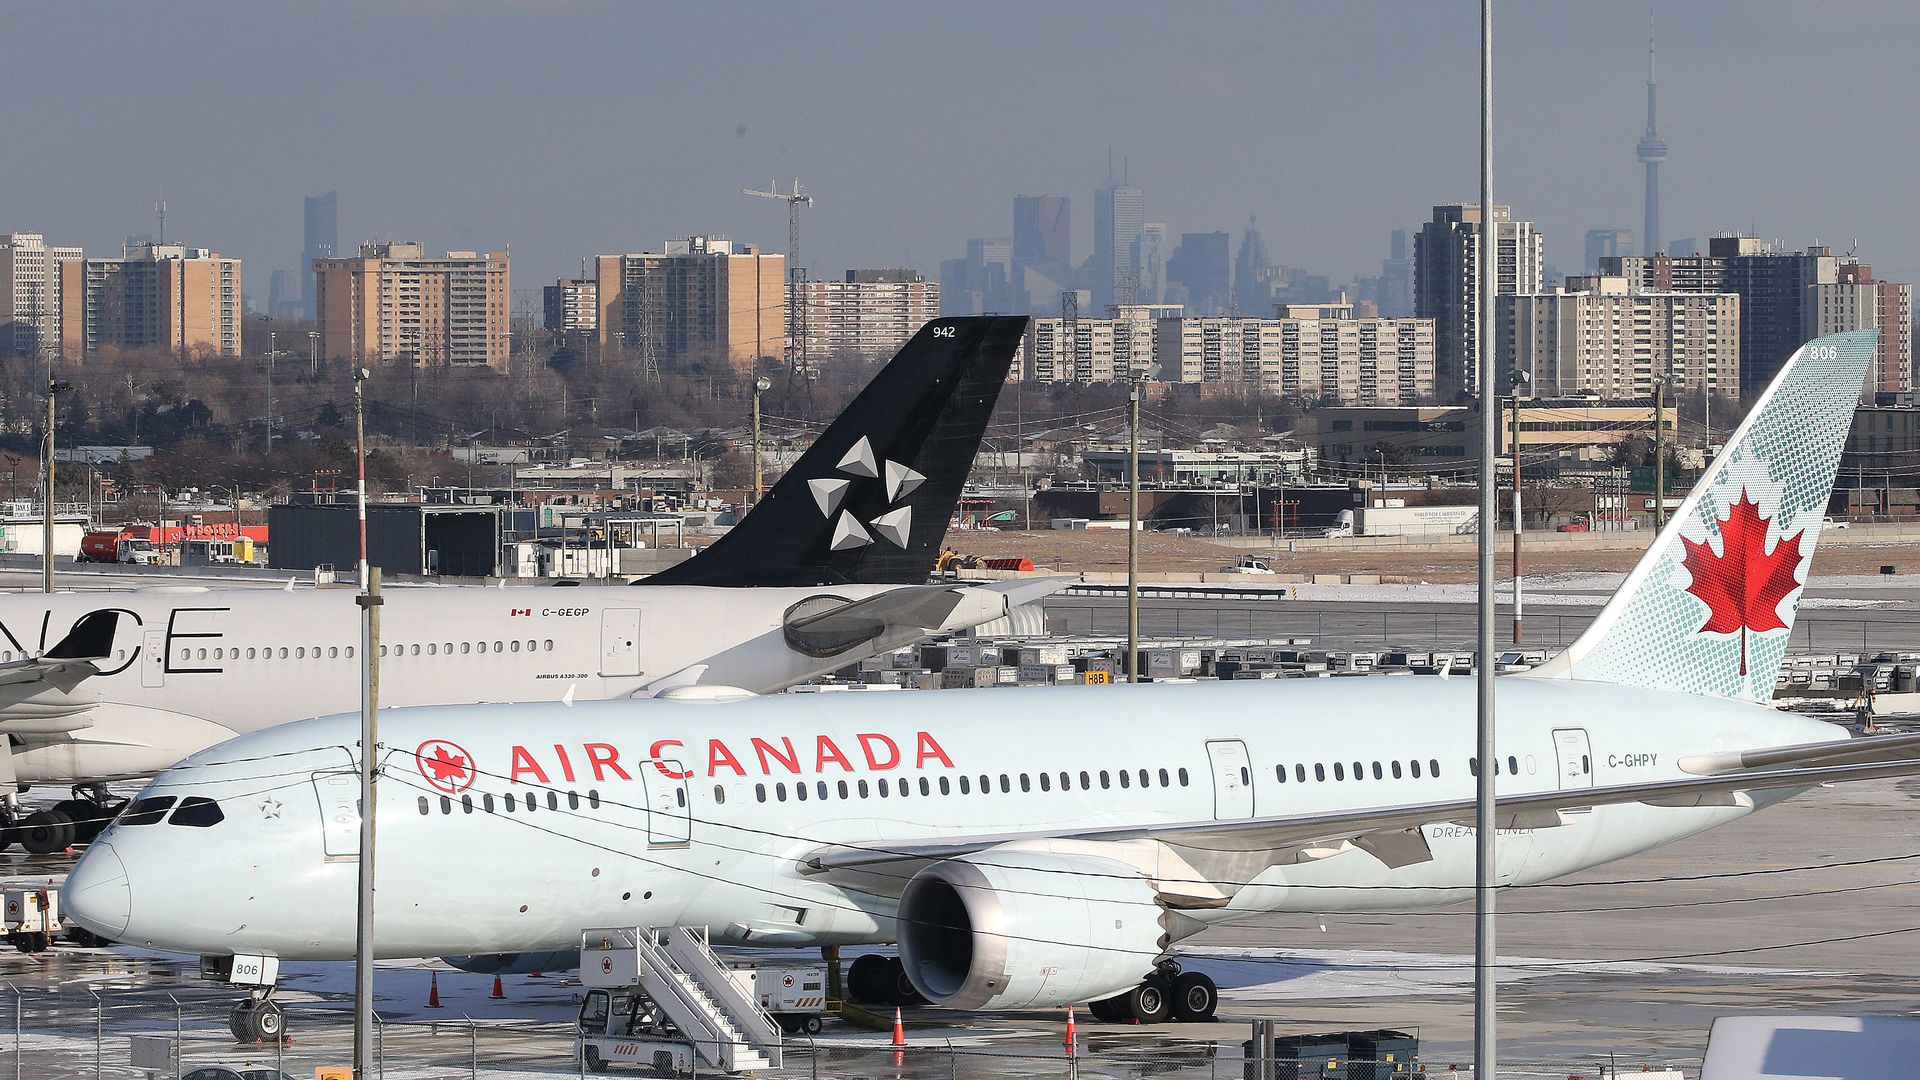 A grounded Air Canada airplane